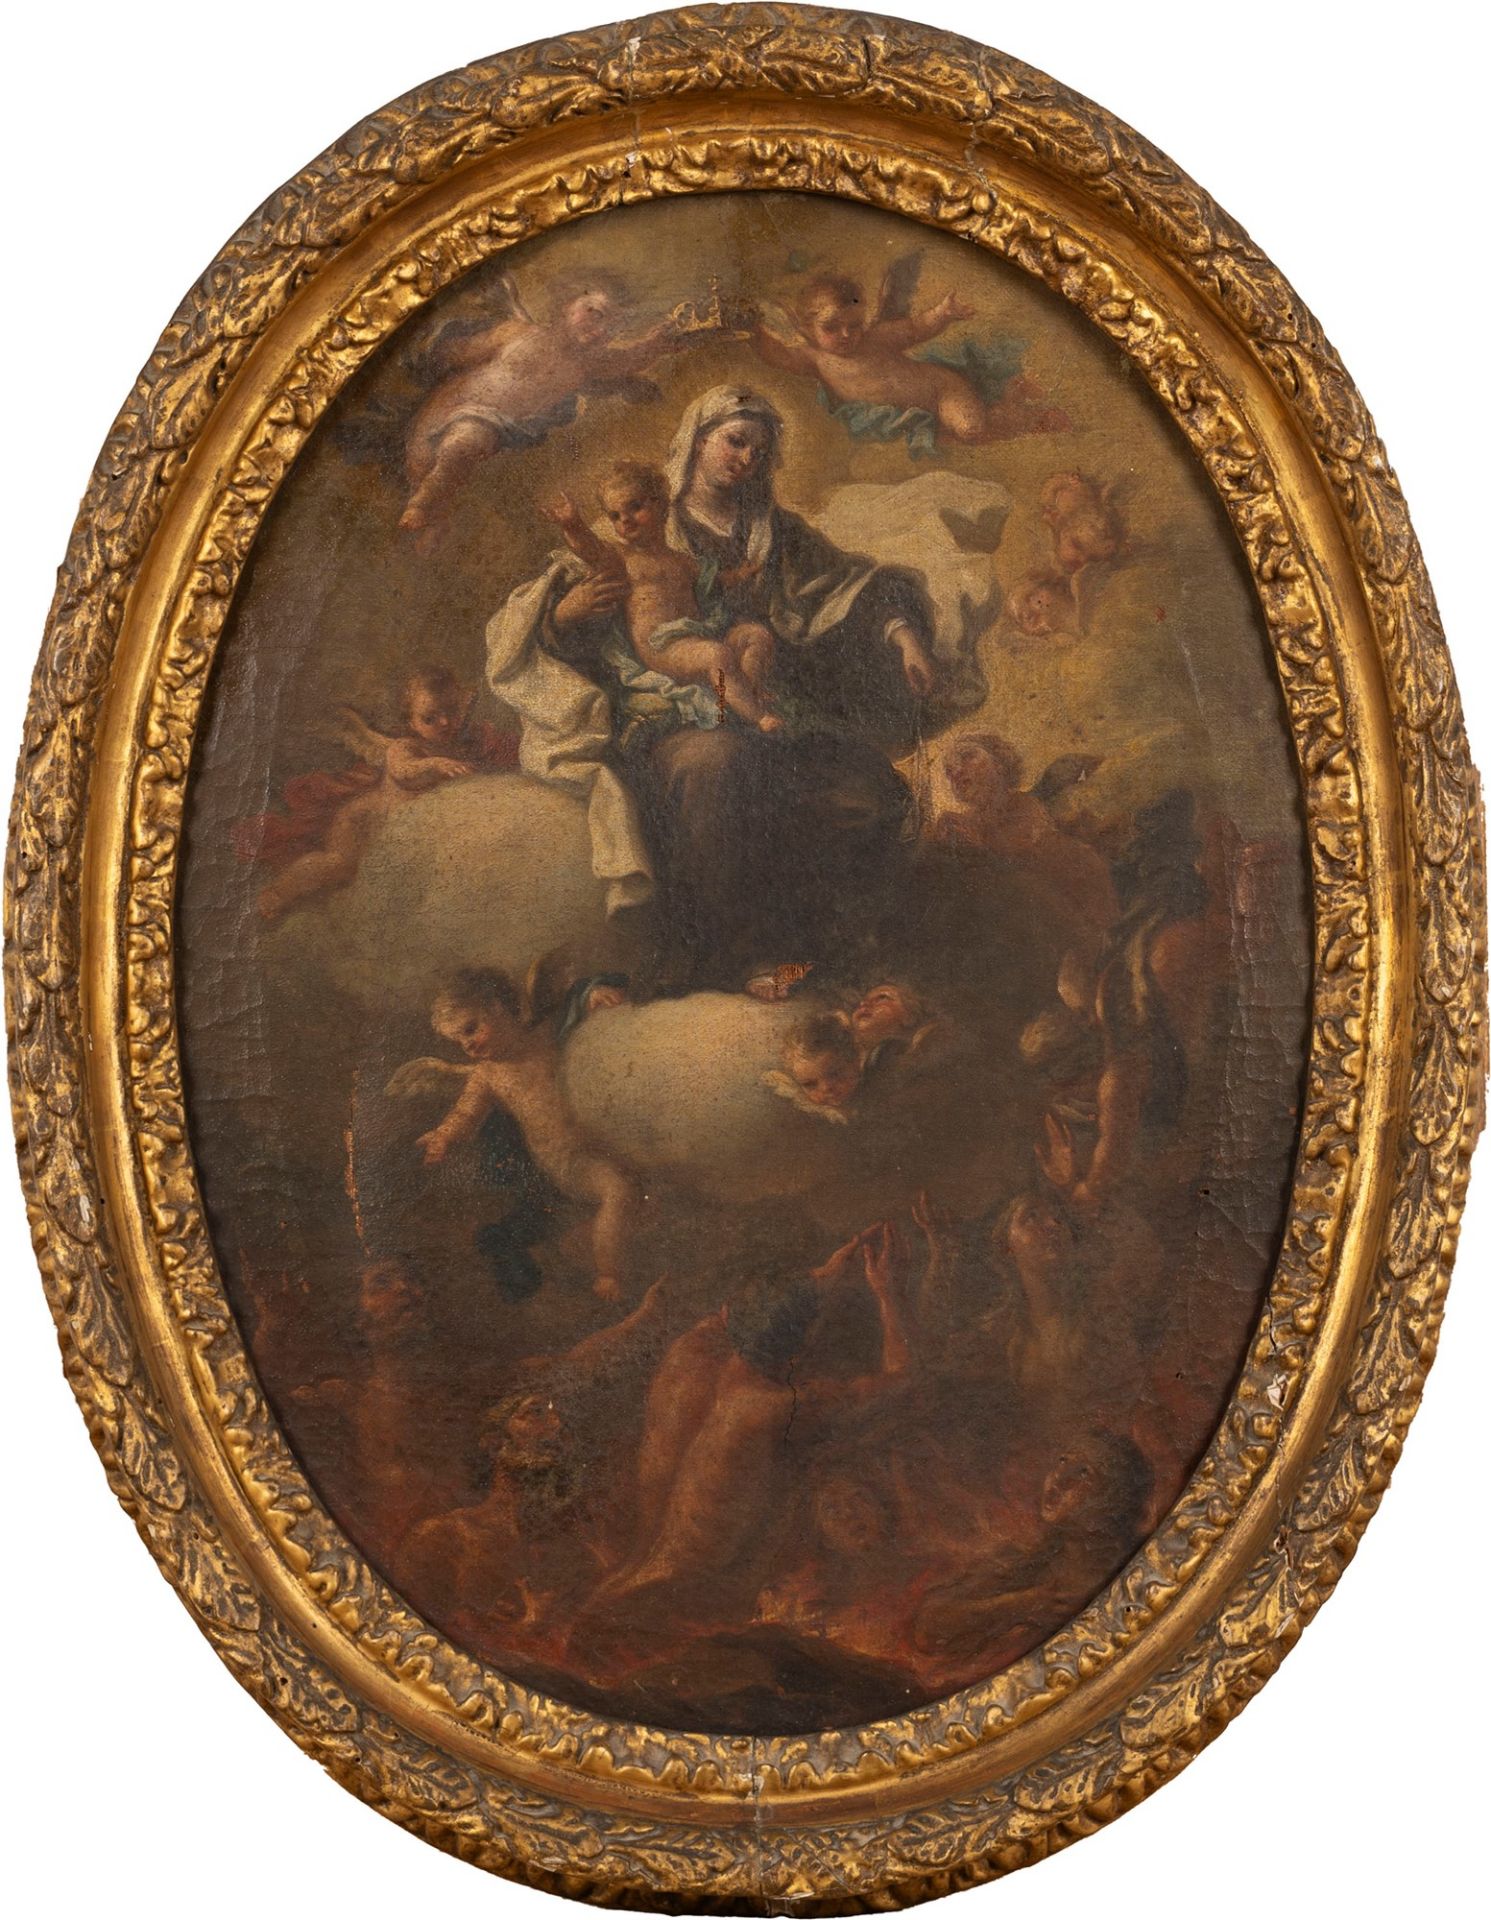 Neapolitan school, eighteenth century - Apparition of the Virgin with Child to the souls in purgator - Image 2 of 3